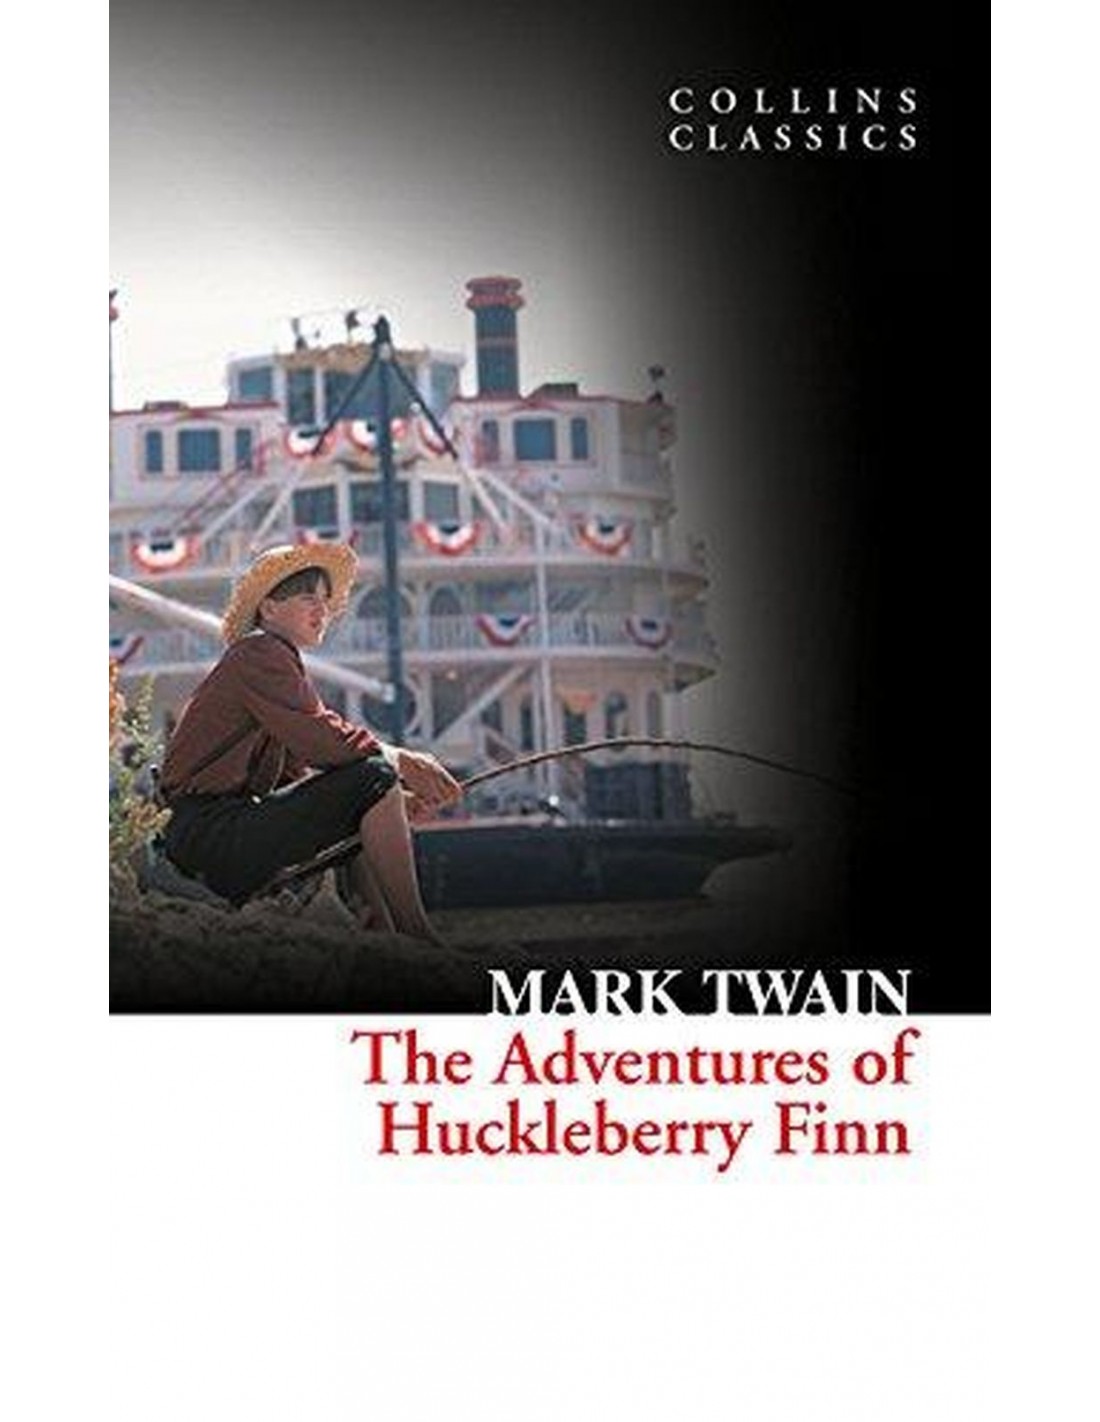 The Adventures of Huckleberry Finn download the new version for mac